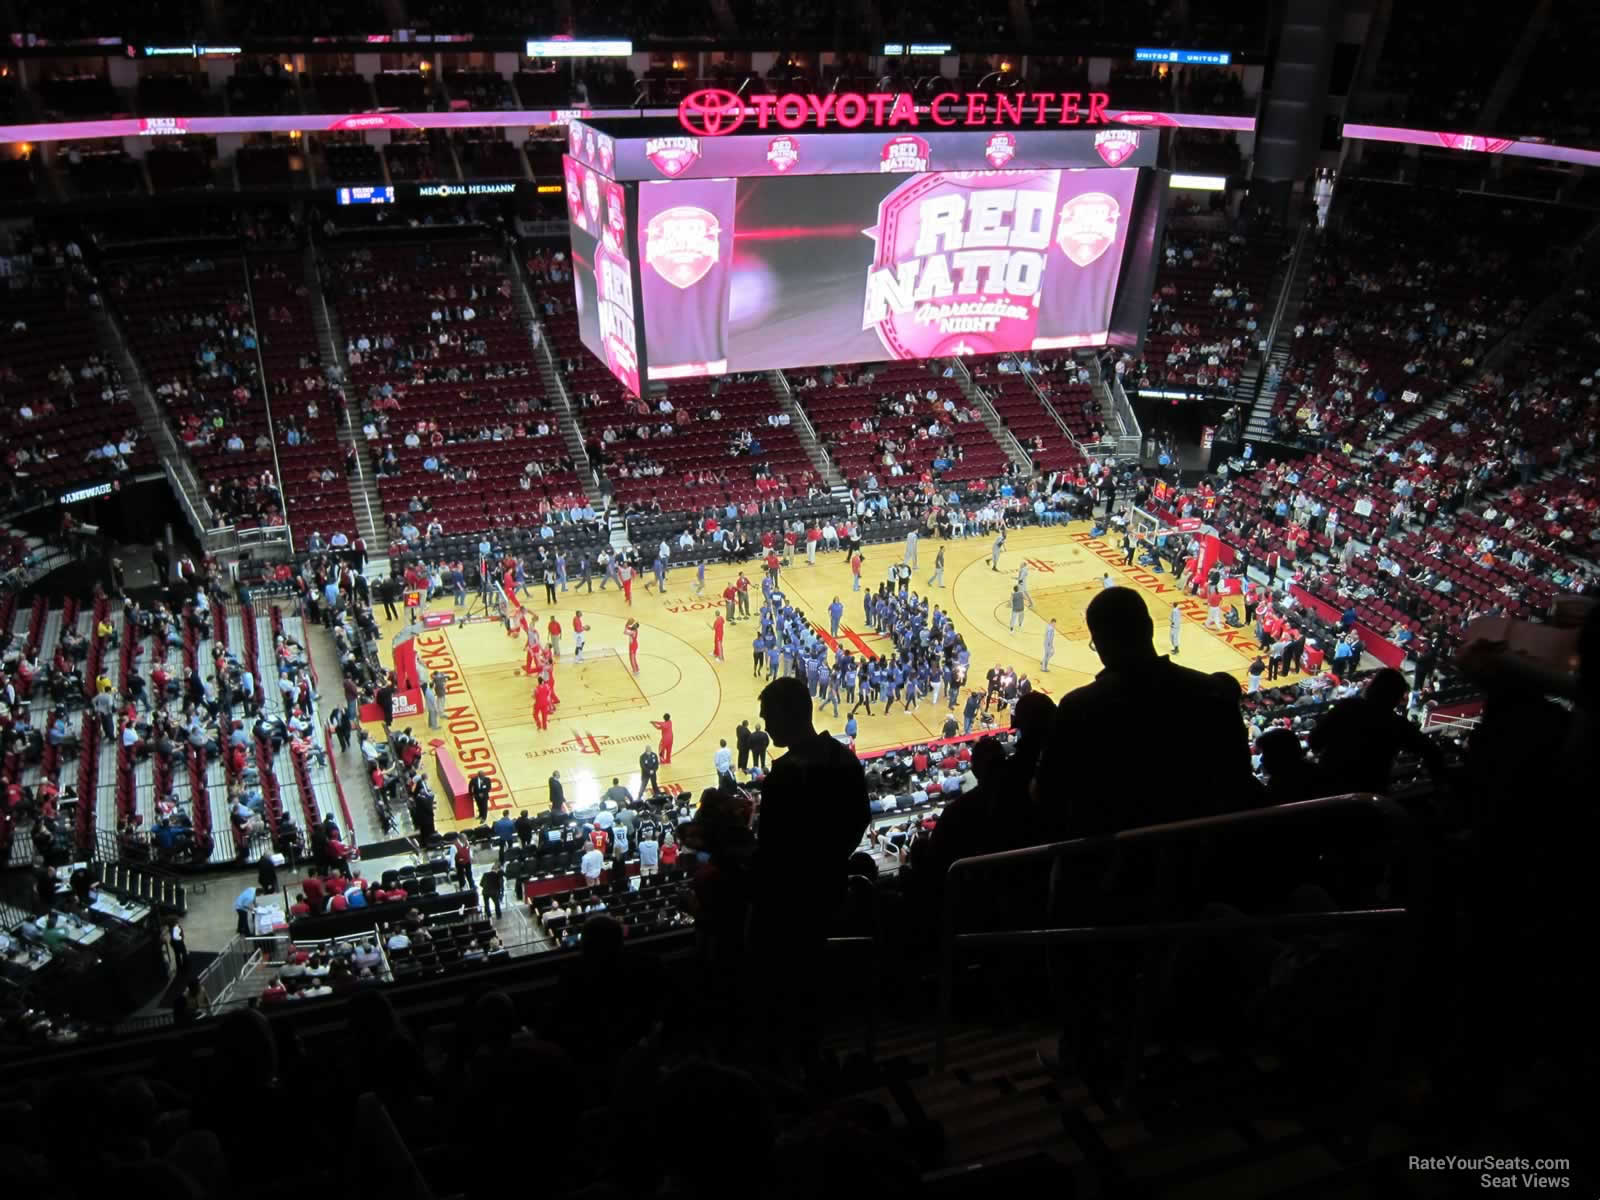 section 429, row 9 seat view  for basketball - toyota center